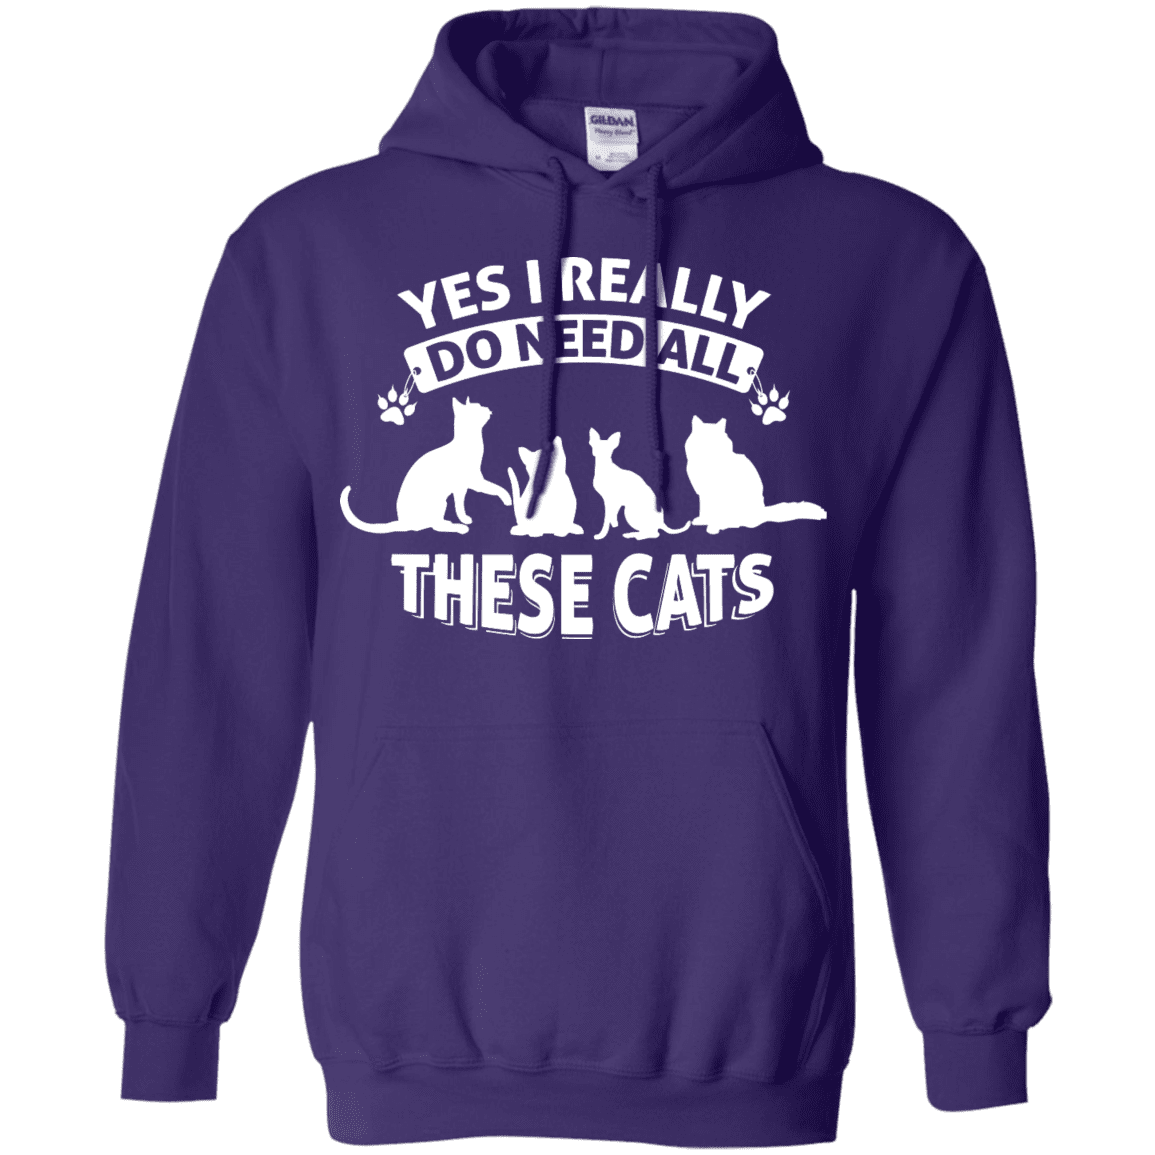 Yes I Need All These Cats - Hoodie.